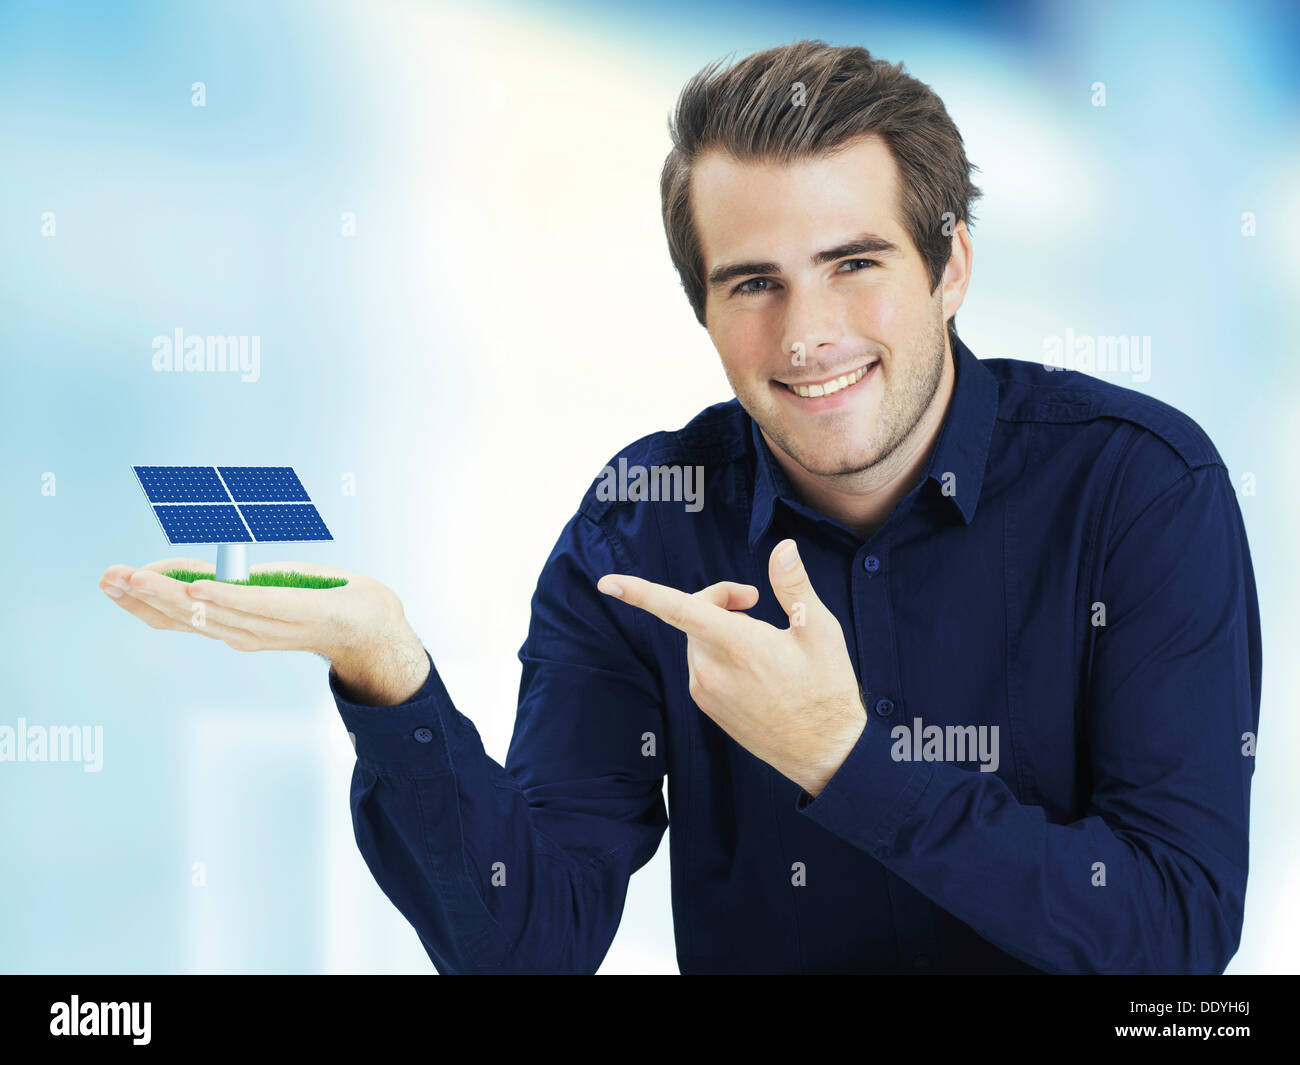 Smiling man pointing to solar cell in his hand Stock Photo